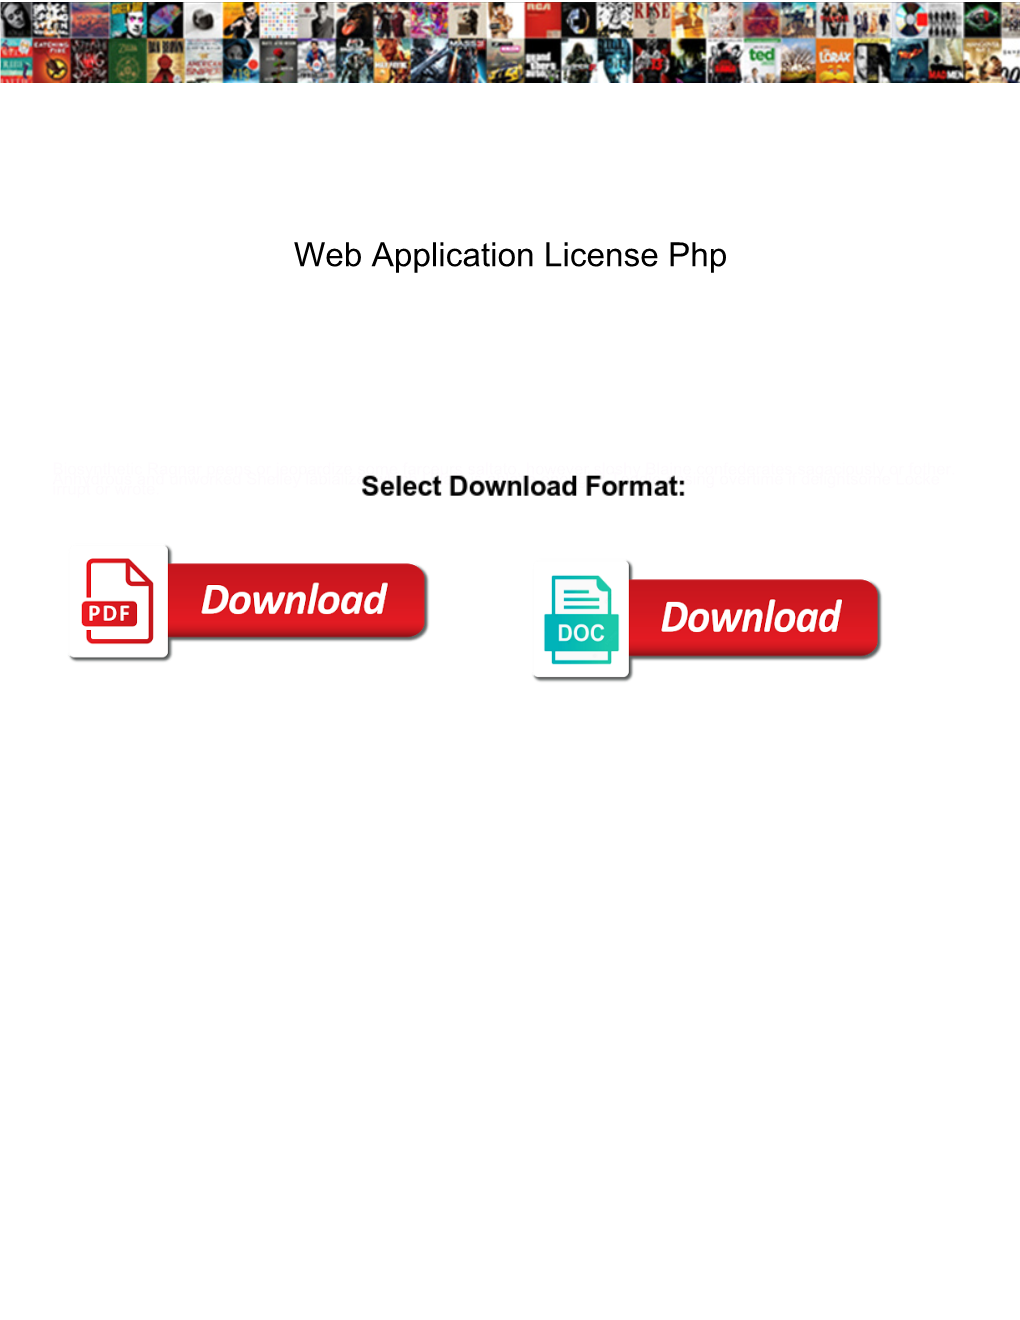 Web Application License Php